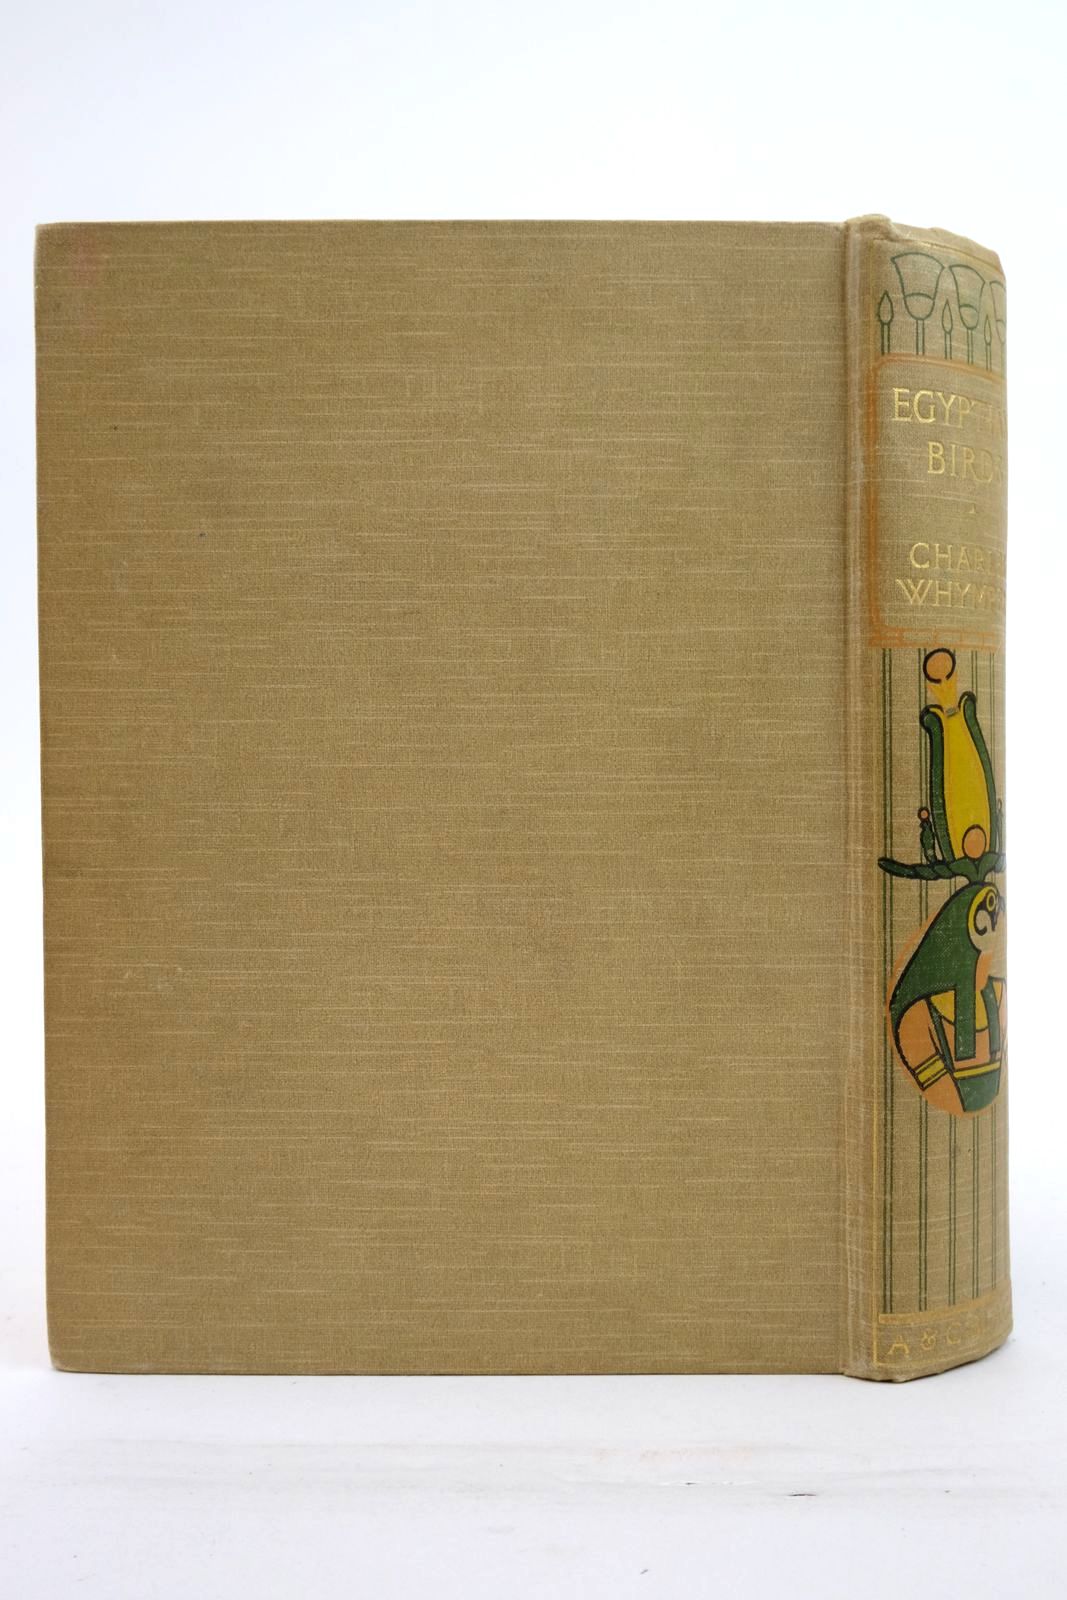 Photo of EGYPTIAN BIRDS written by Whymper, Charles illustrated by Whymper, Charles published by Adam & Charles Black (STOCK CODE: 2137437)  for sale by Stella & Rose's Books